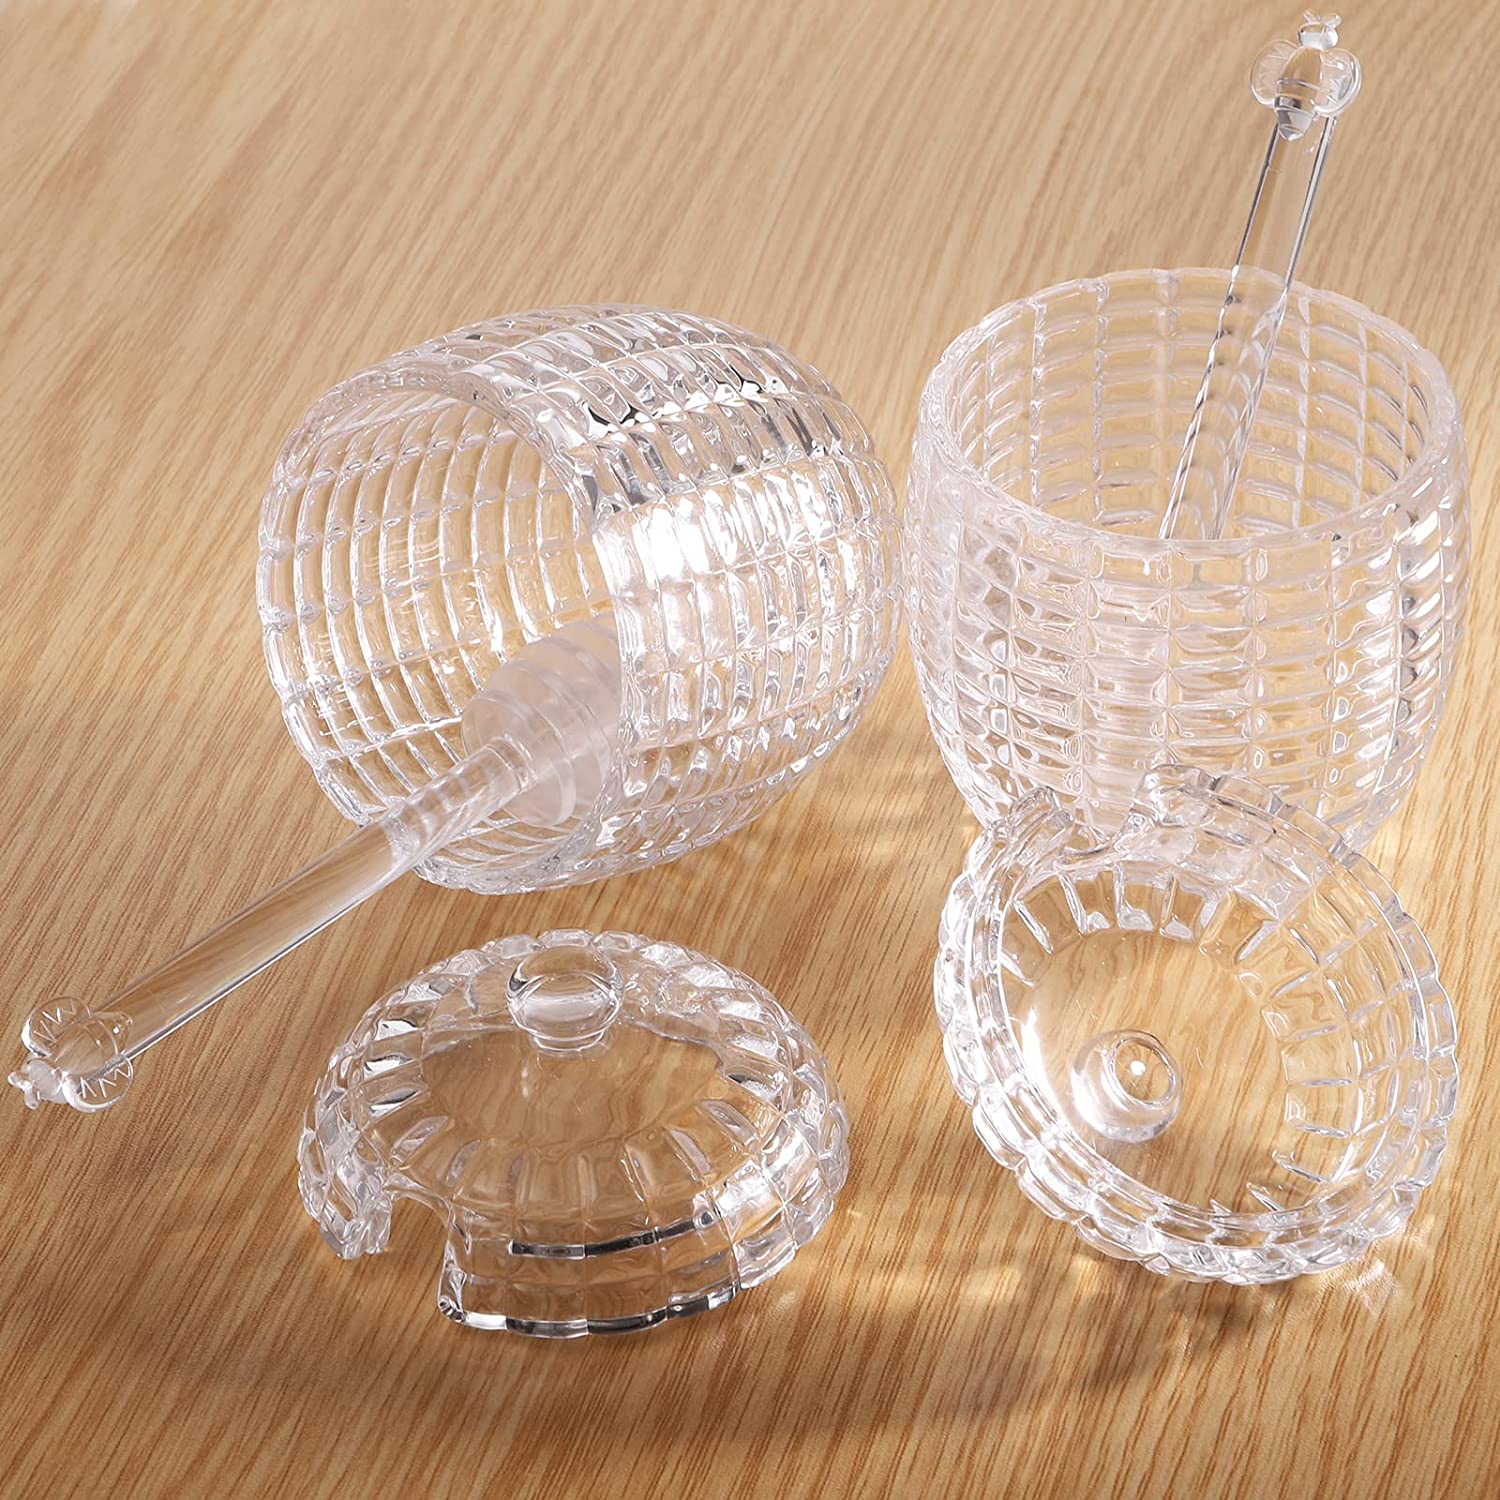 2 Pack Glass Jar with Dipper and Lid, 8 oz Glass Honey Pot Container Beehive Honey Dish for Home Kitchen